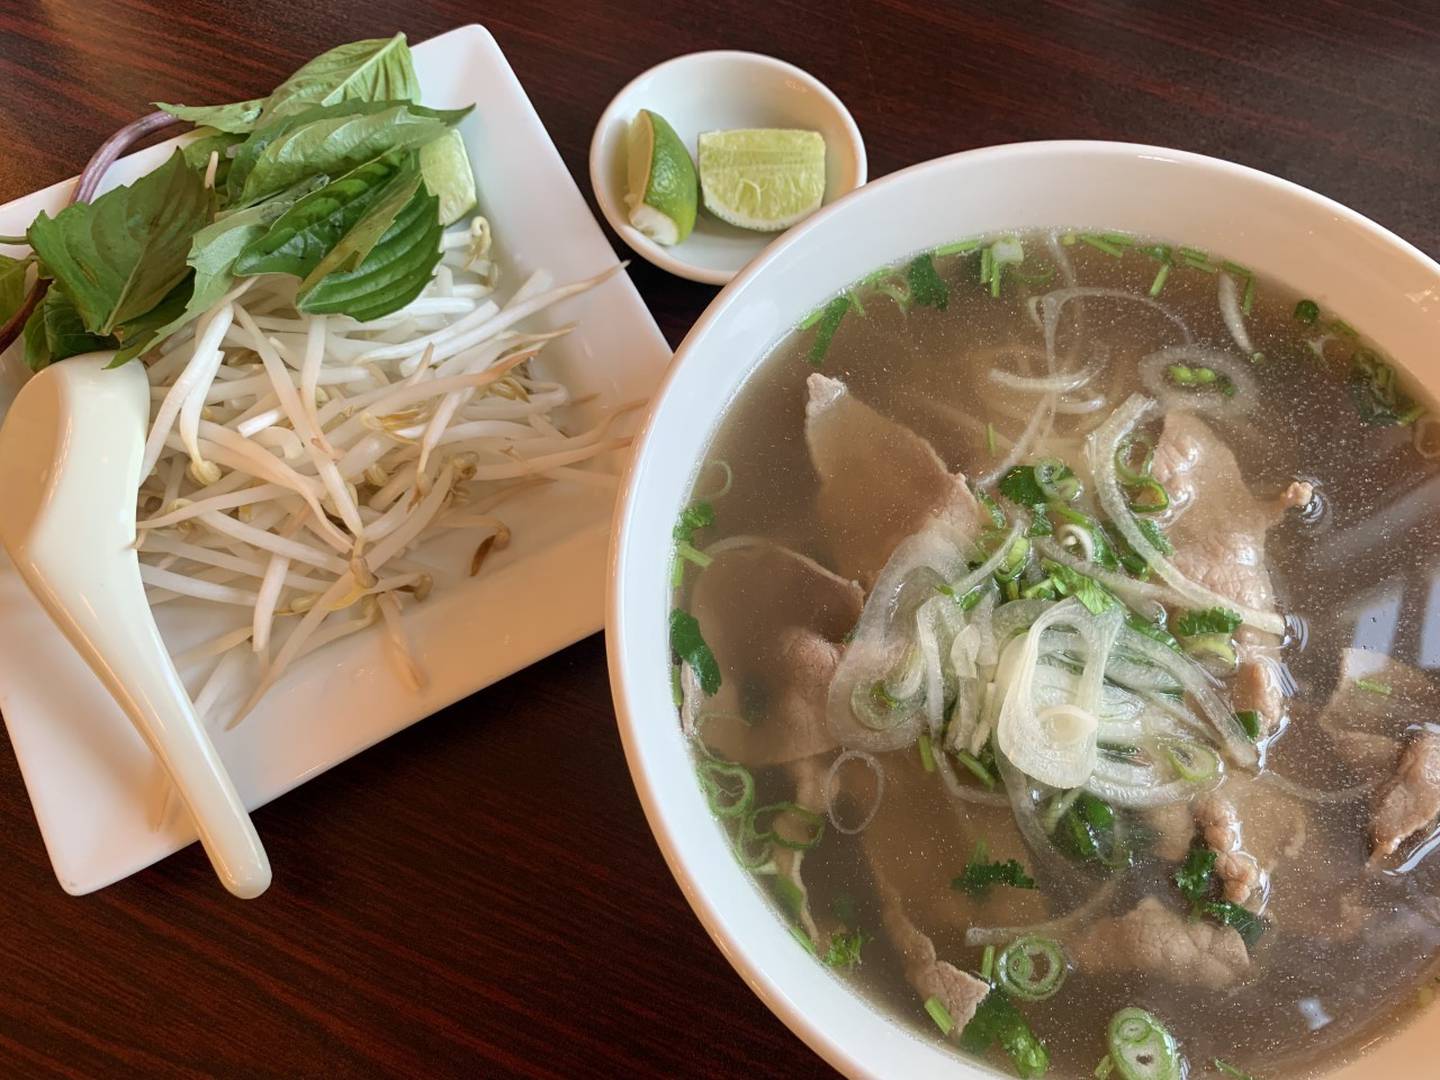 The rare steak pho is #18 on the menu at Pho Ly in St. Charles.